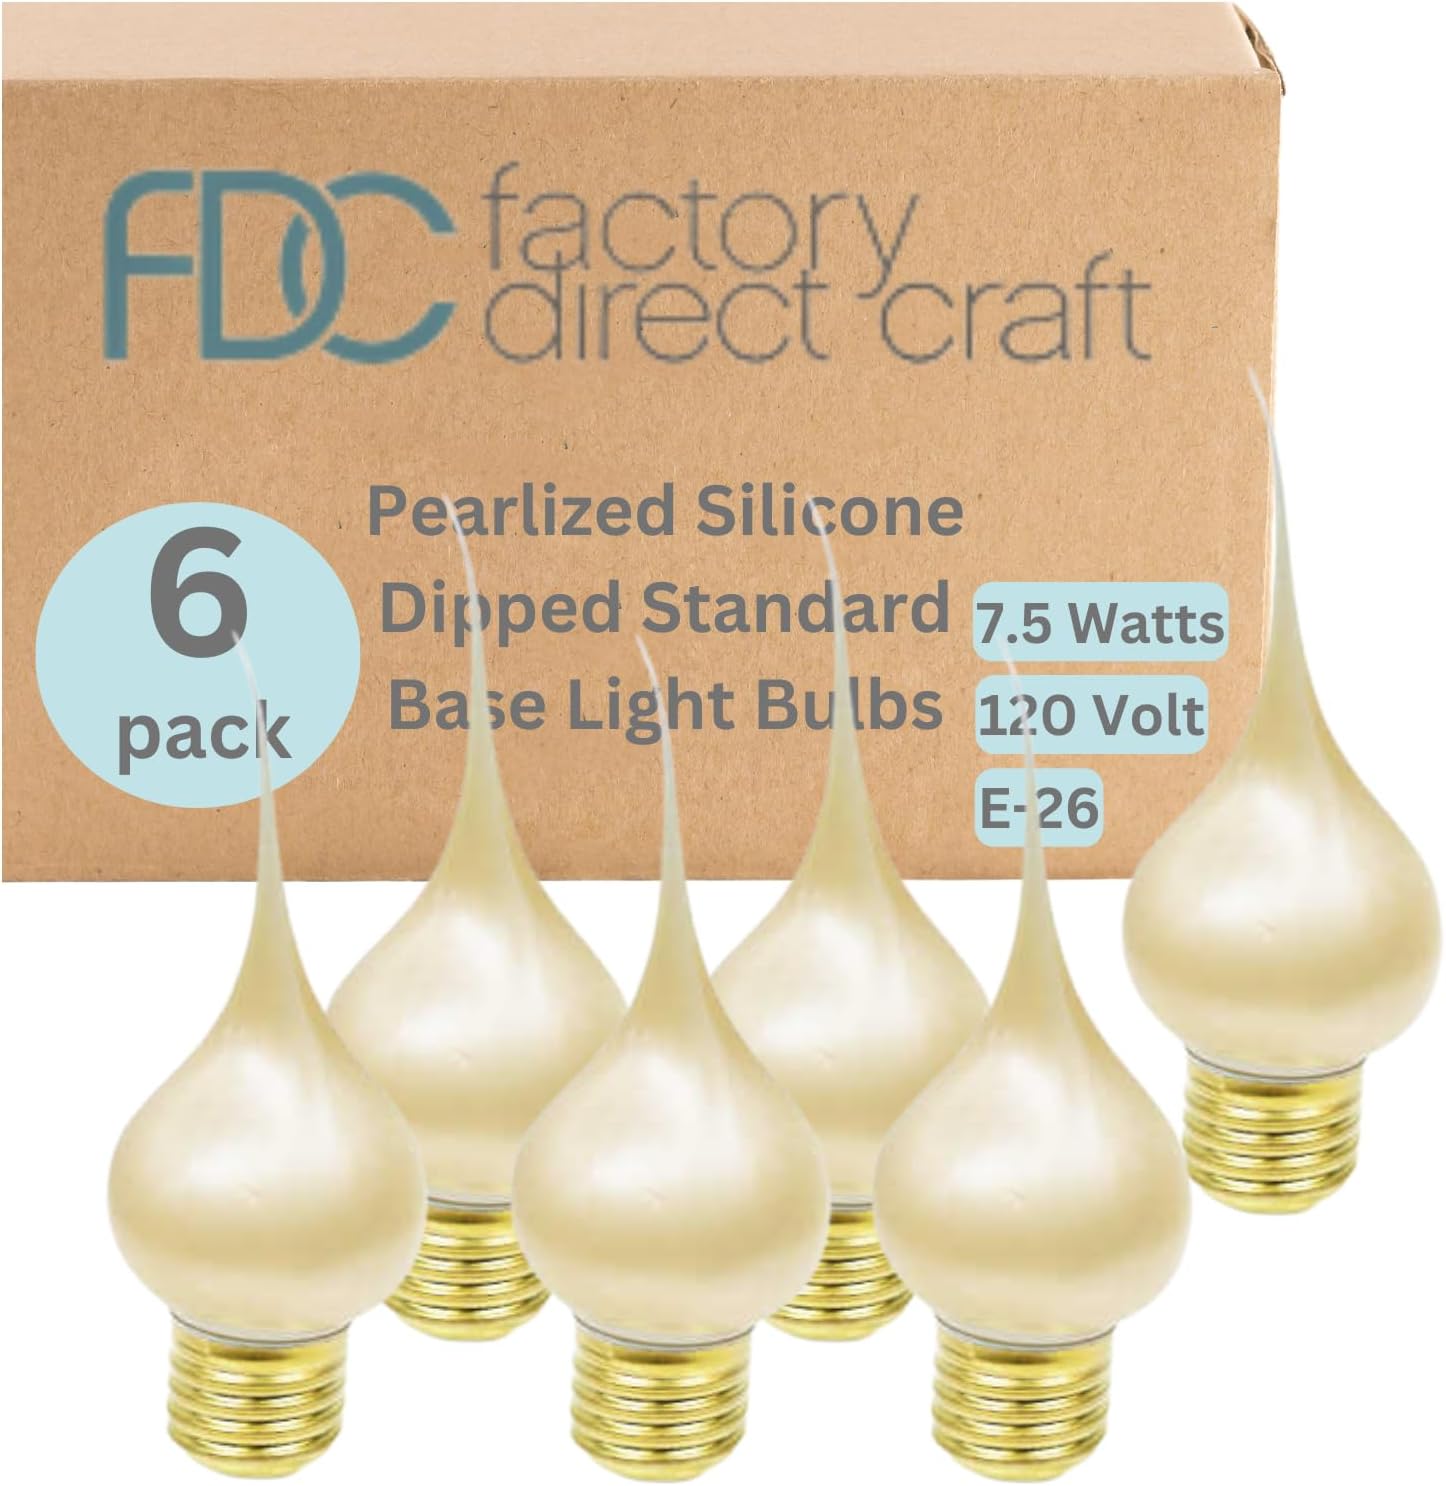 Pearlized Silicone Dipped Standard Base Incandescent Light Bulbs - 7.5W, 120V, UL Listed - Set of 6 for Charming Primitive Accents and Stylish Home Décor Standard E-26 - image 1 of 6